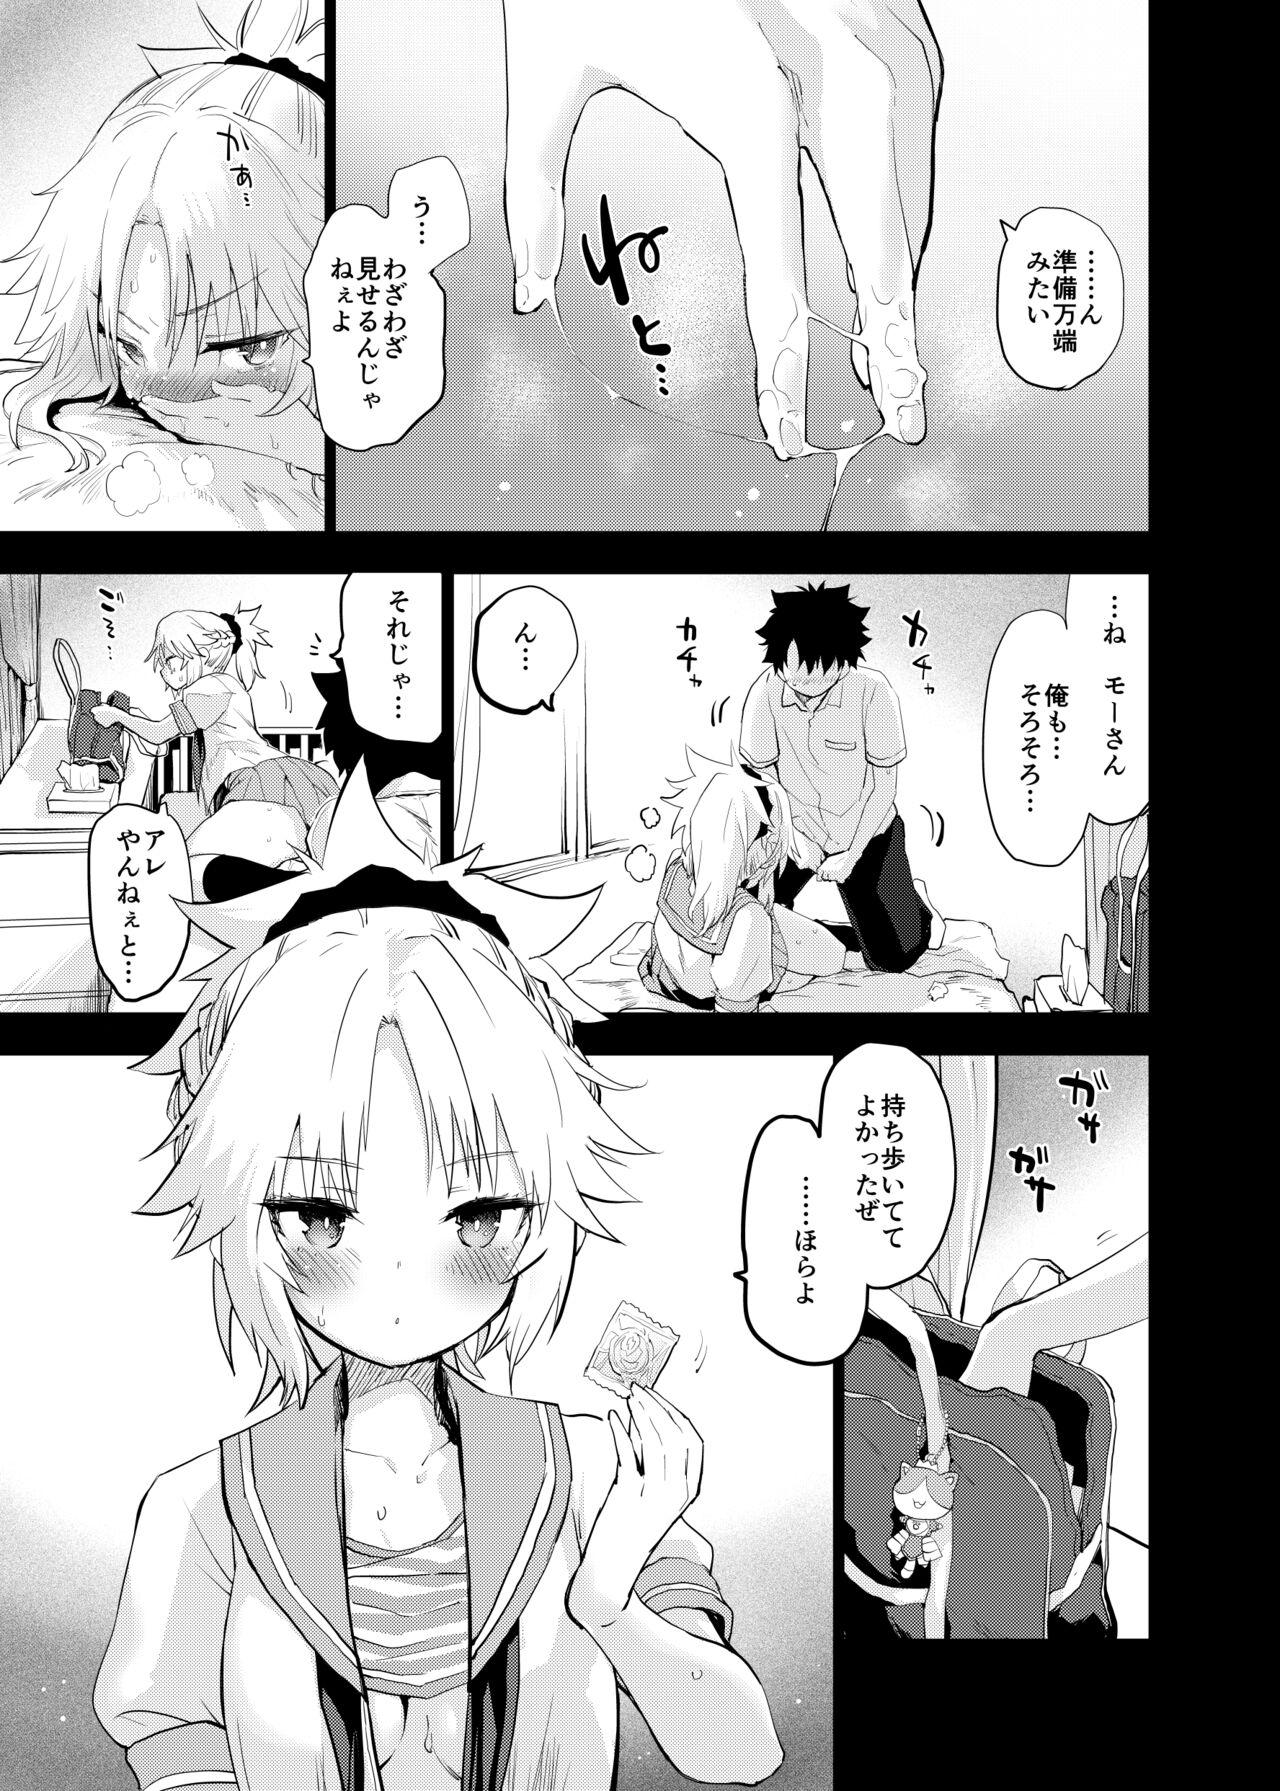 Nipple ApocryFucking' School Life Collabo Event - Fate grand order Step Sister - Page 9